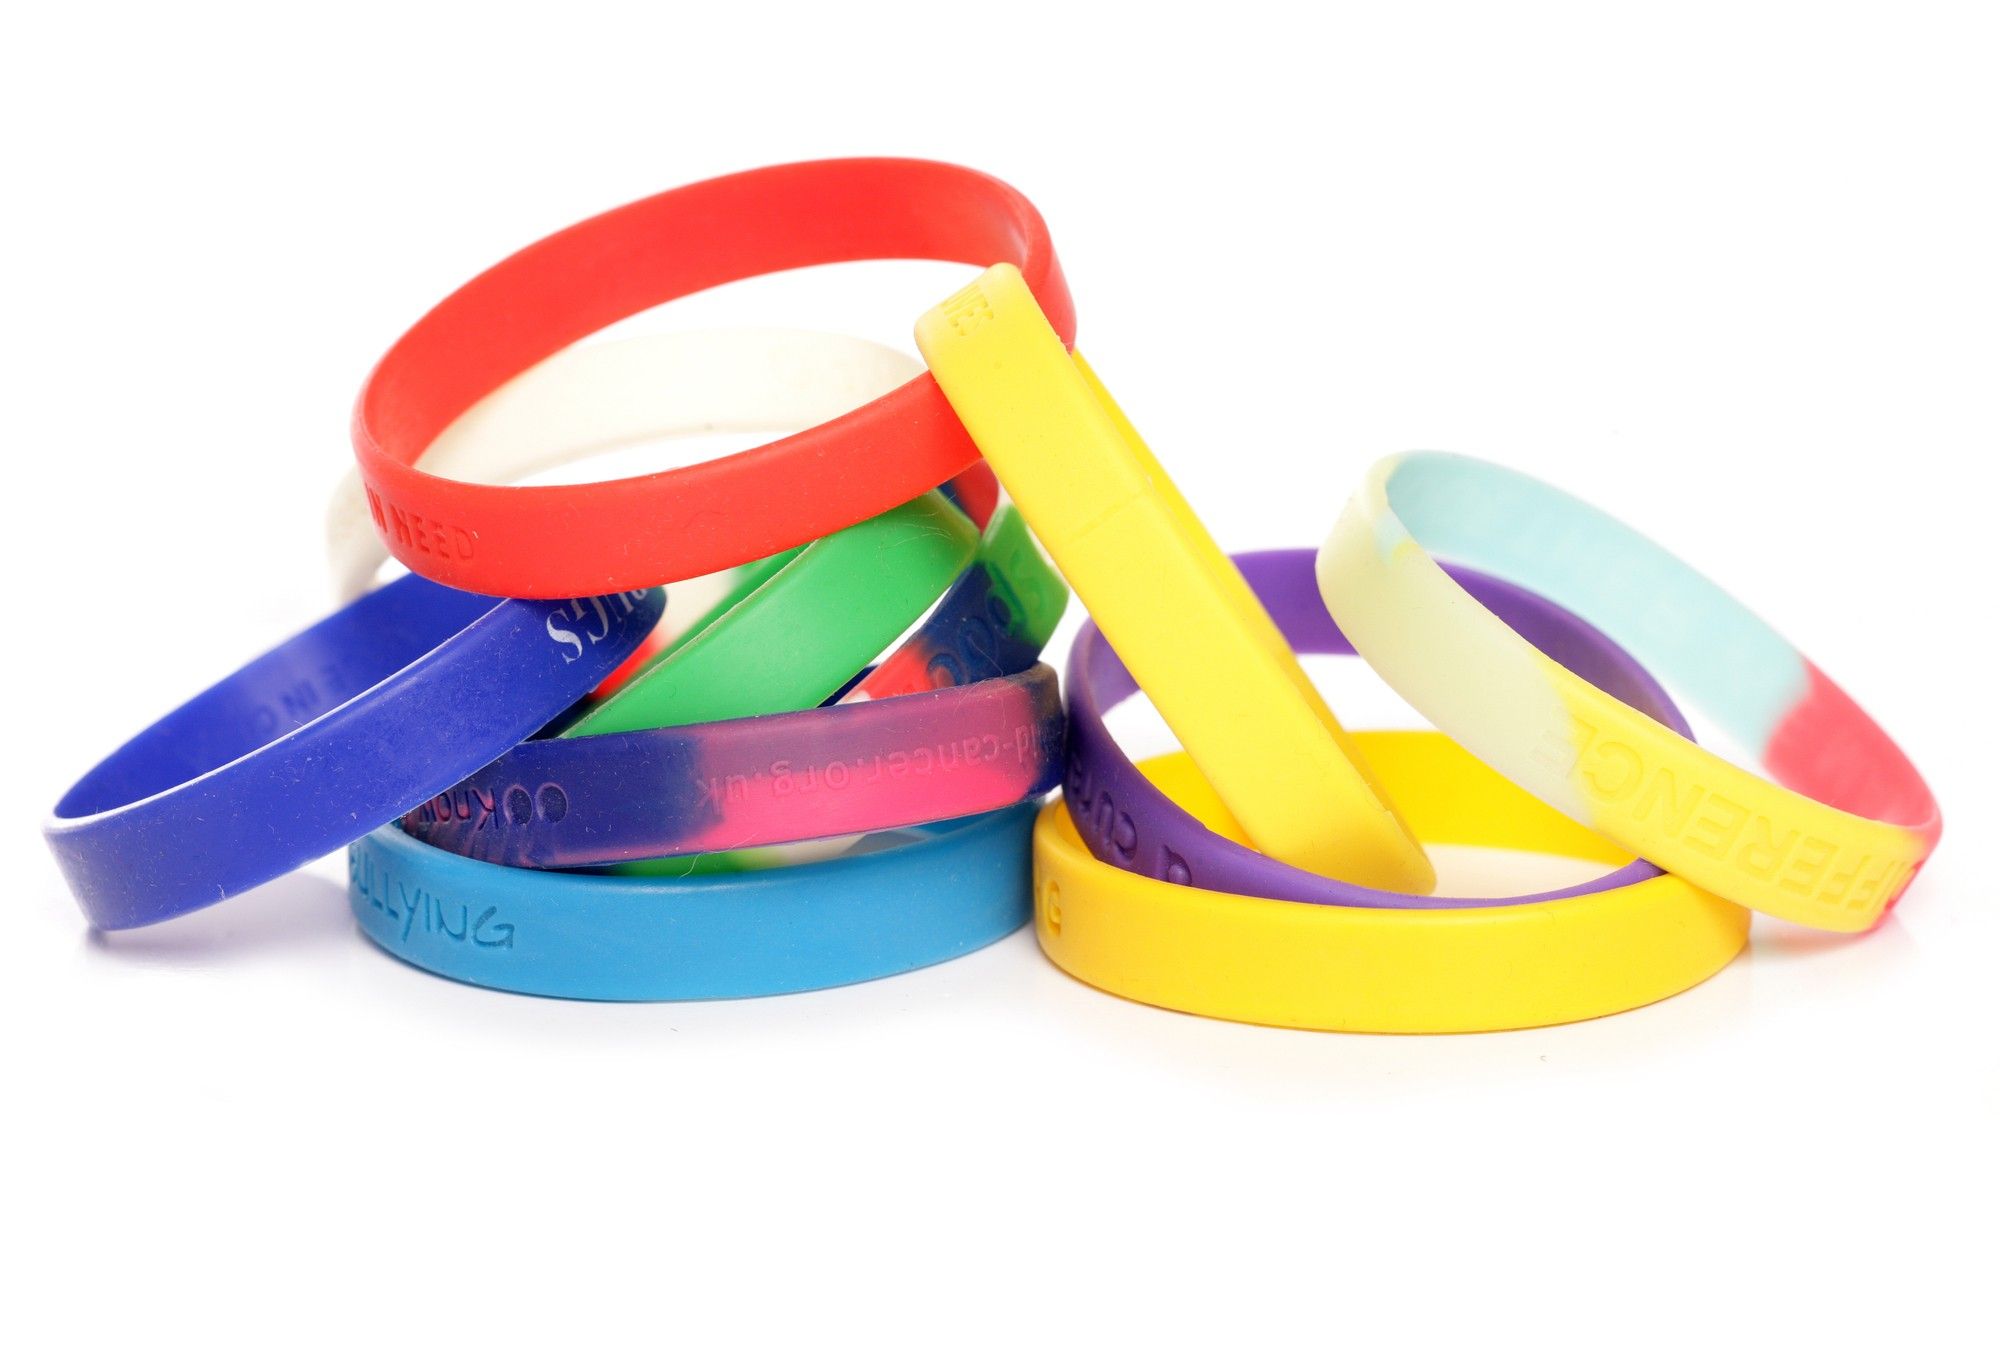 A settlement has been reached to resolve claims that customized silicone wristbands and pin buttons were overpriced.